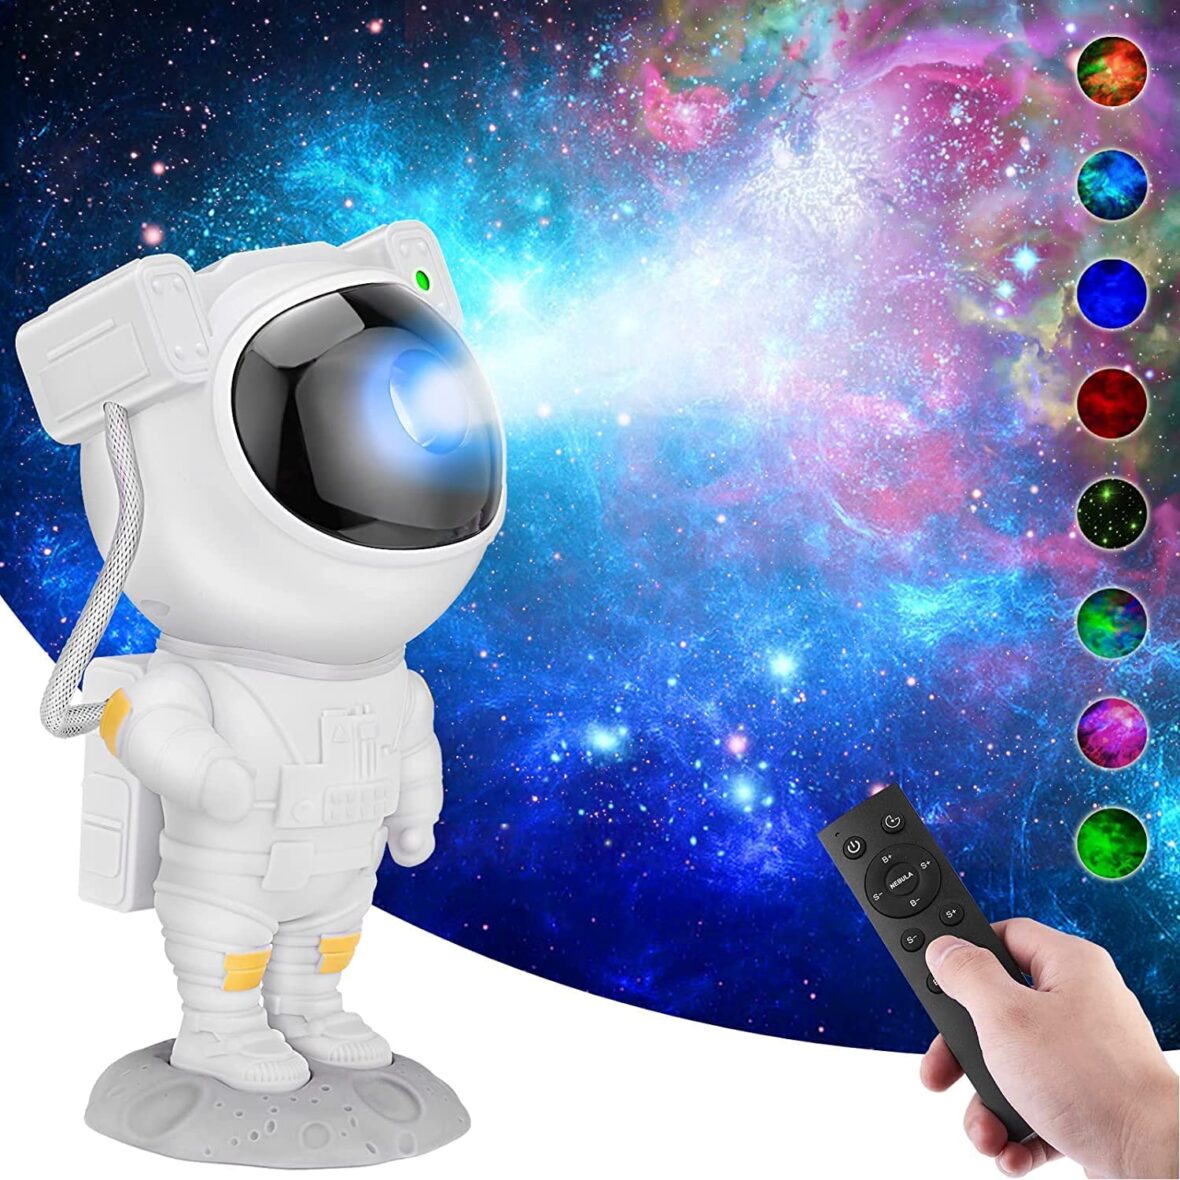 U Smile Astronaut Star Projector Galaxy Projector with Remote Control – 360° Adjustable Timer Kids Astronaut Nebula Night Light, for Baby Adults Bedroom, Gaming Room, Home and Party